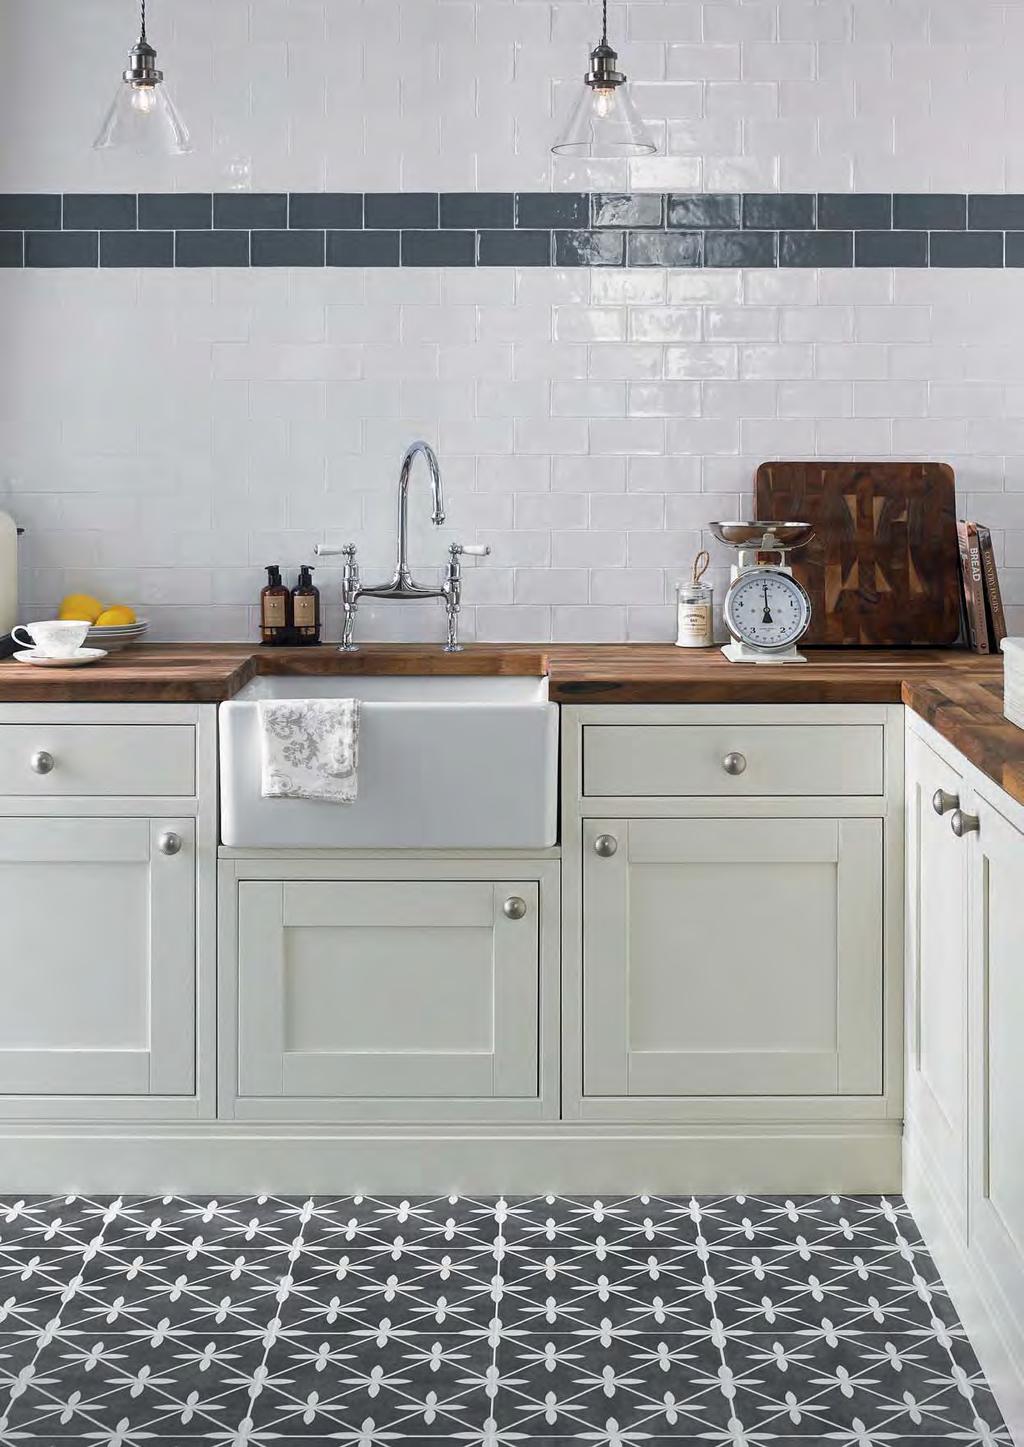 The Laura Ashley tile collection from British